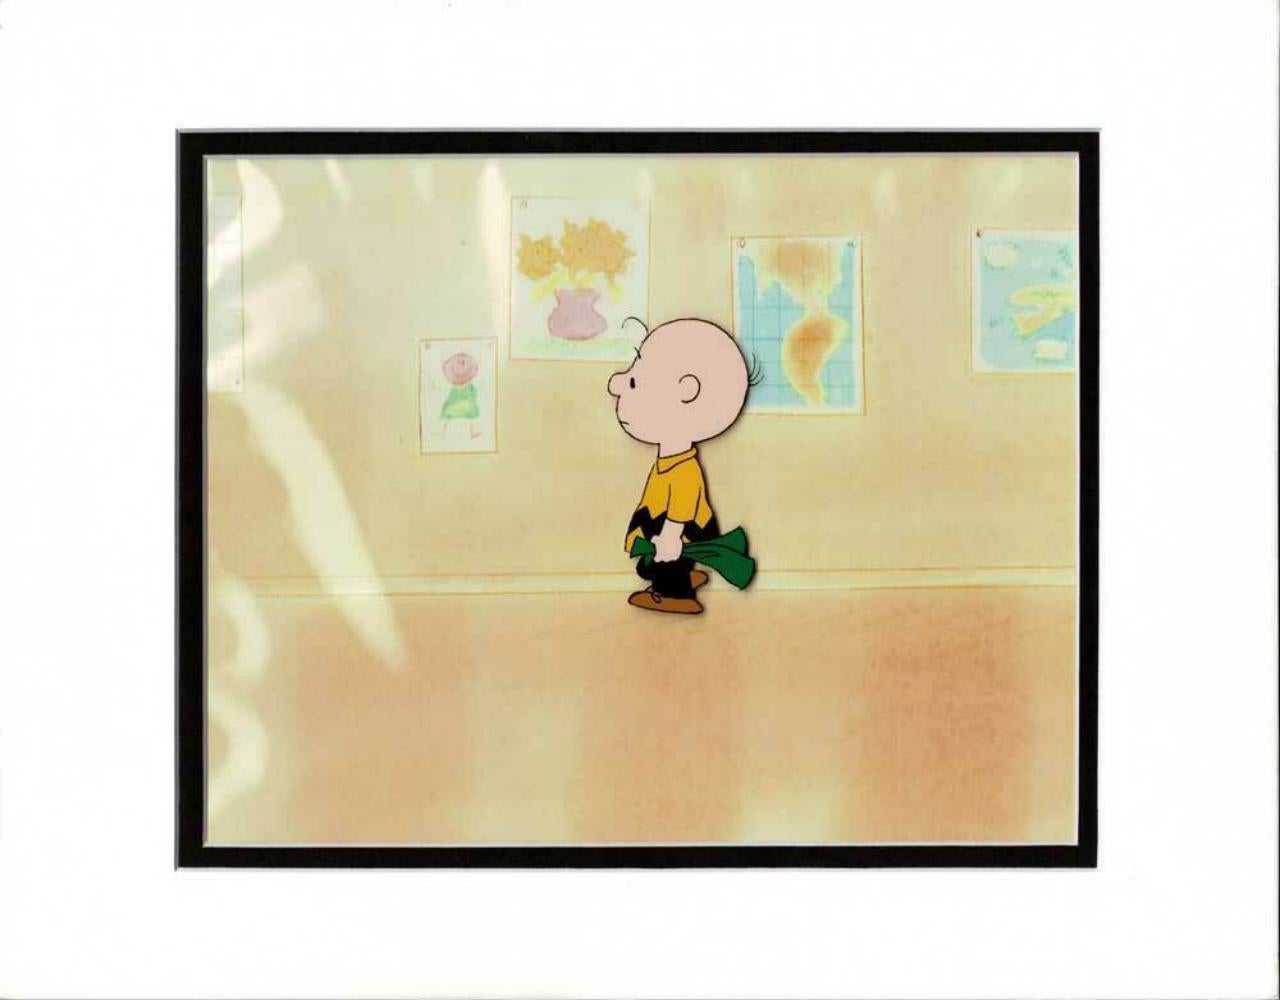 Peanuts Charlie Brown And Snoopy Show Production Animation Cel 1983-1985 - Art by Charles M. Schulz